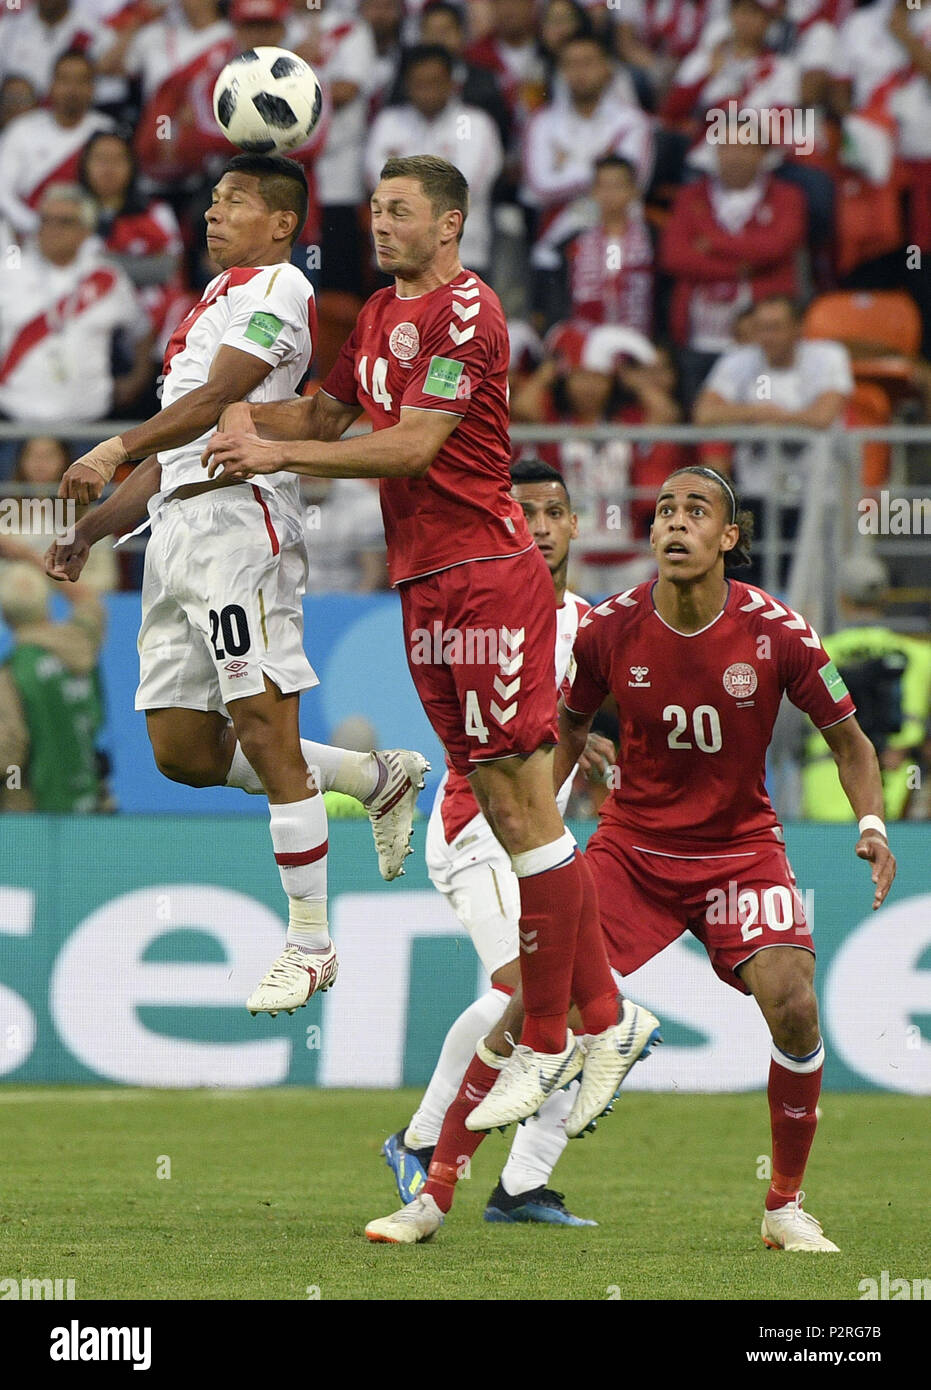 Saransk, Russia. 16th June, 2018. Edison Flores (1st L) of Peru competes for a head ball with Henrik Dalsgaard (2nd L) of Denmark during a group C match between Peru and Denmark at the 2018 FIFA World Cup in Saransk, Russia, June 16, 2018. Credit: Lui Siu Wai/Xinhua/Alamy Live News Stock Photo